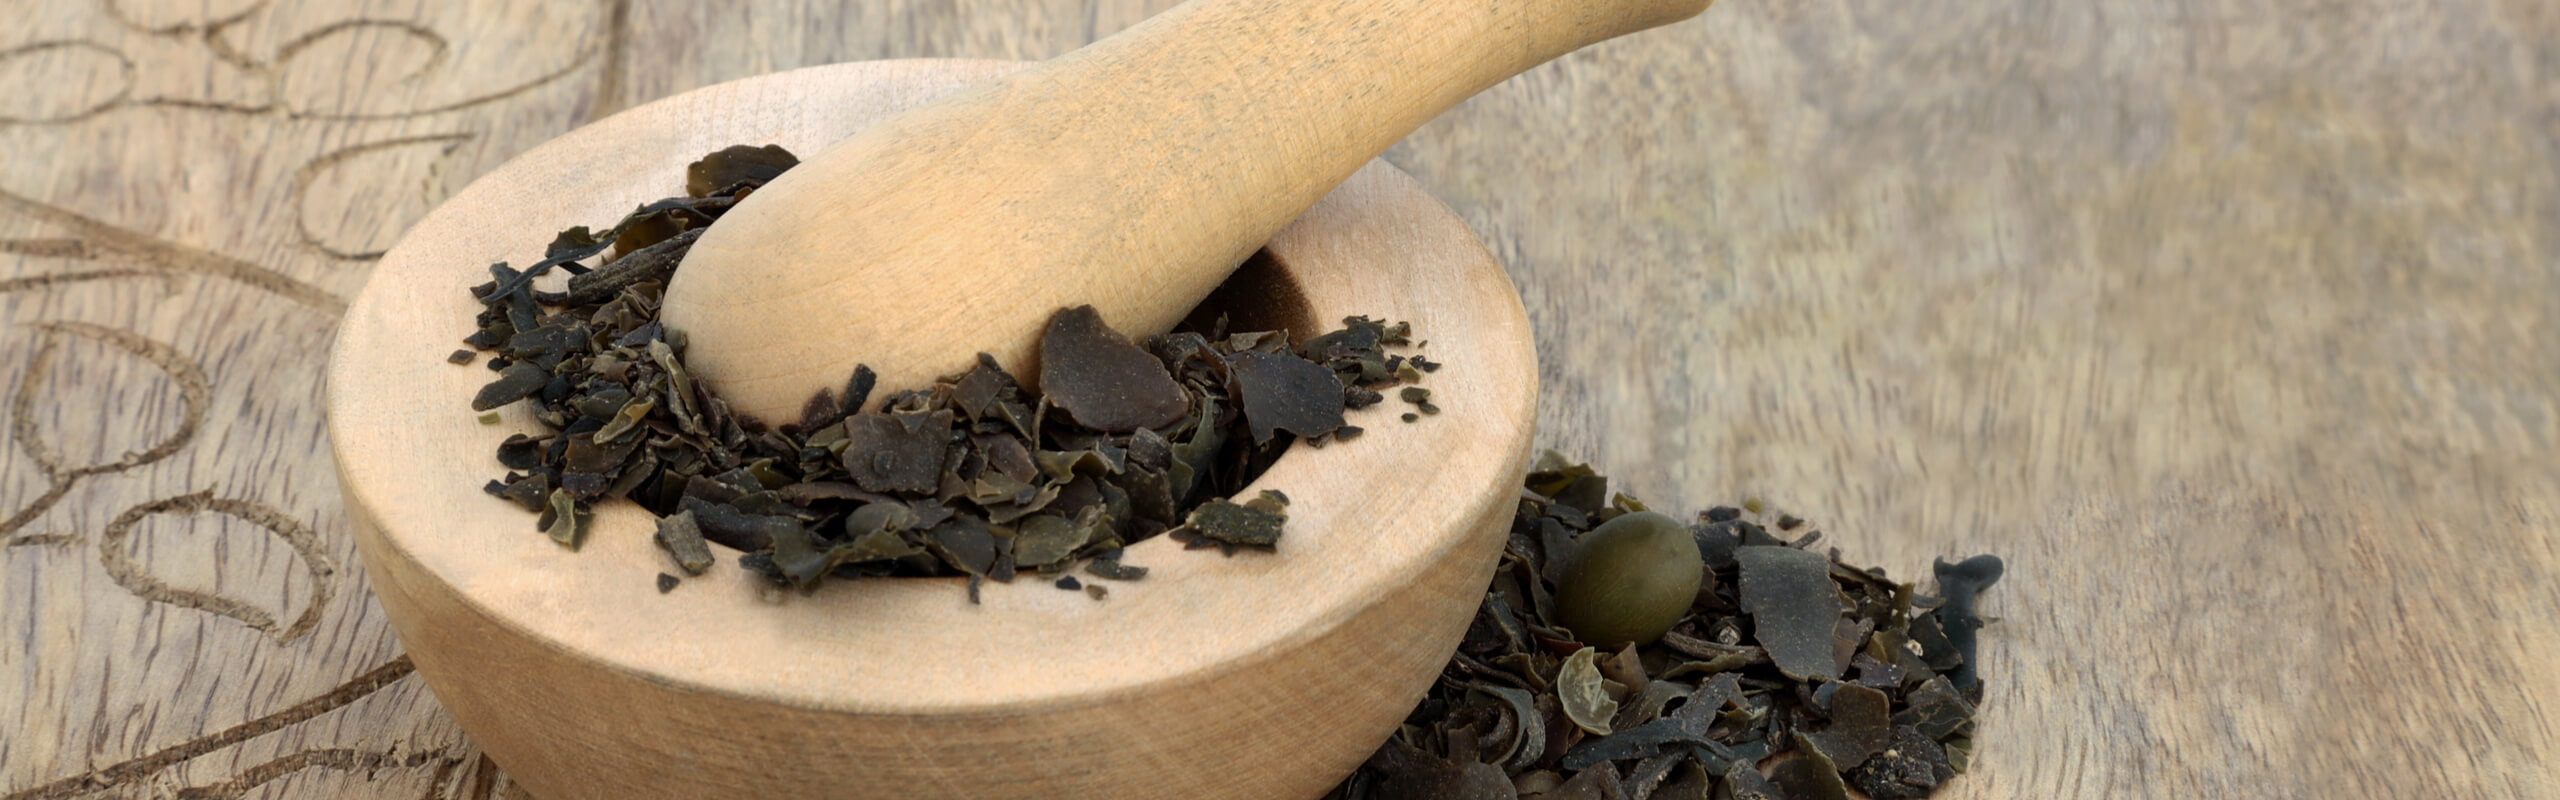 What Herbs Are Good For Thyroid